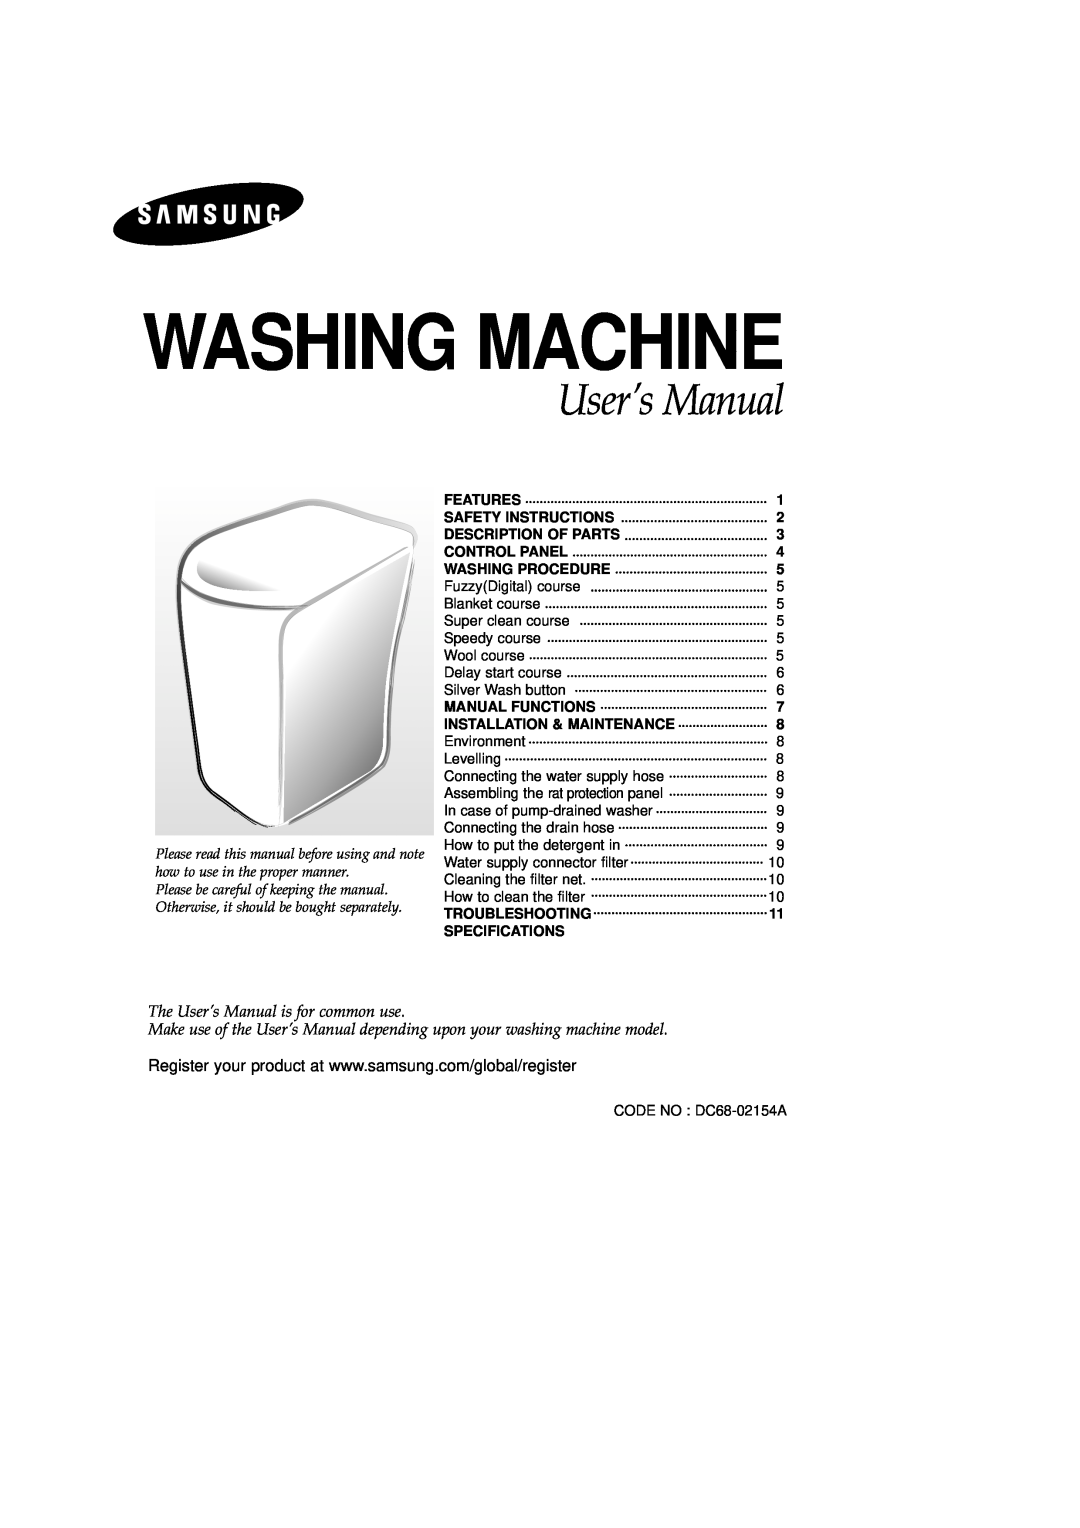 Samsung DC68-02154A user manual The User’s Manual is for common use, Features, Safety Instructions, Description Of Parts 